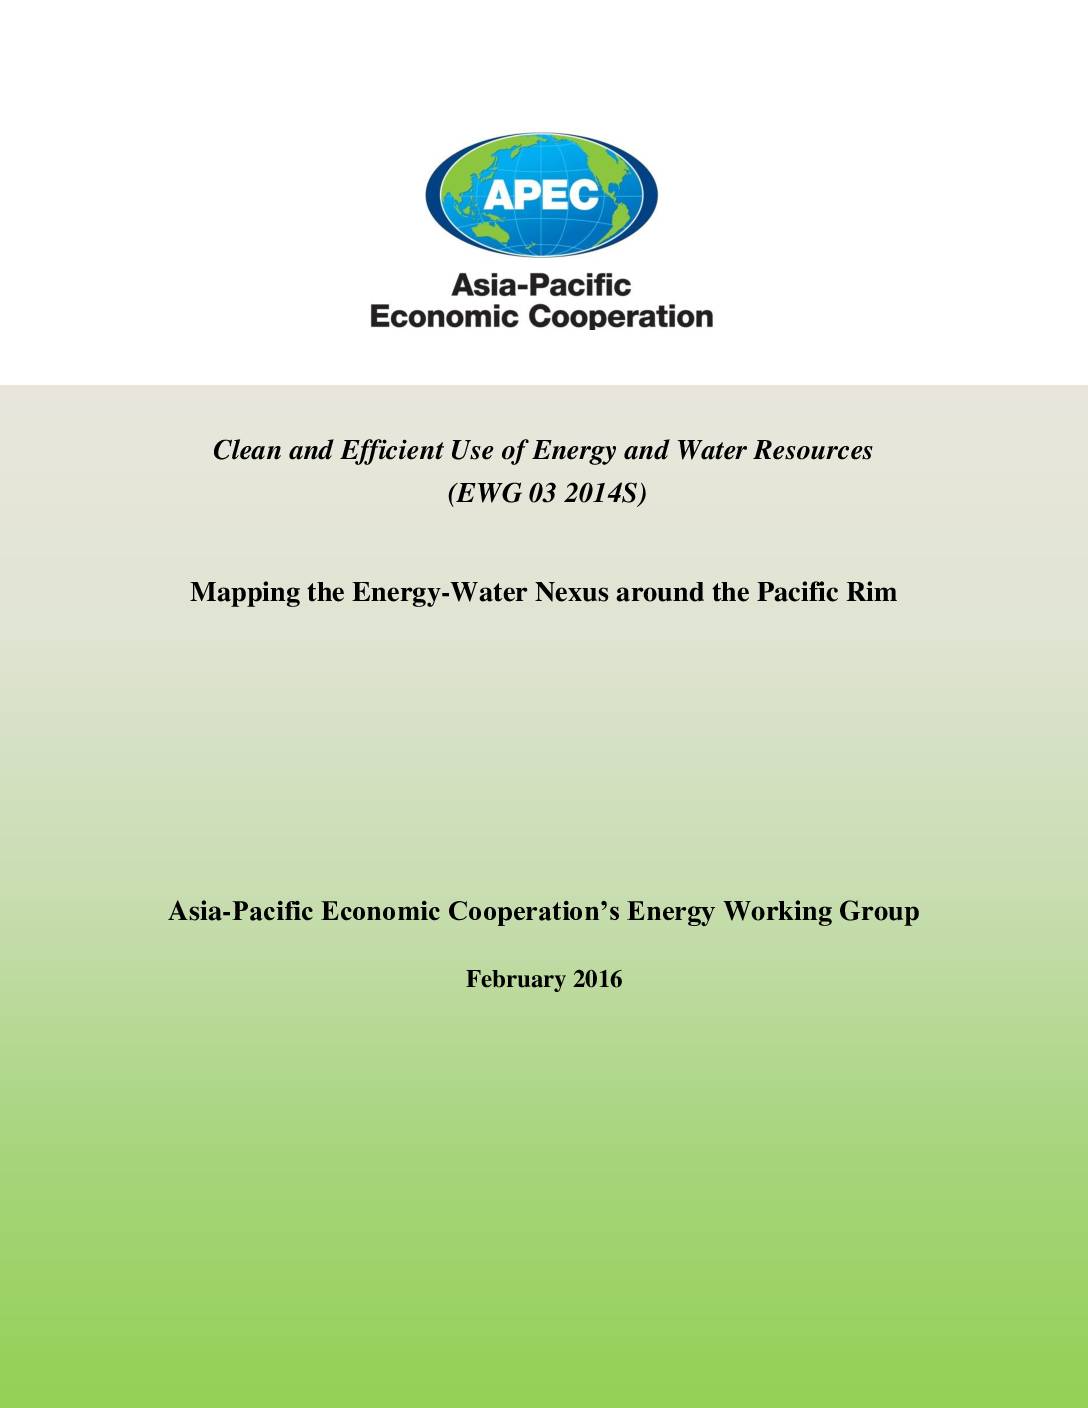 Clean and Efficient Use of Energy and Water Resources – Mapping the Energy-Water Nexus around the Pacific Rim